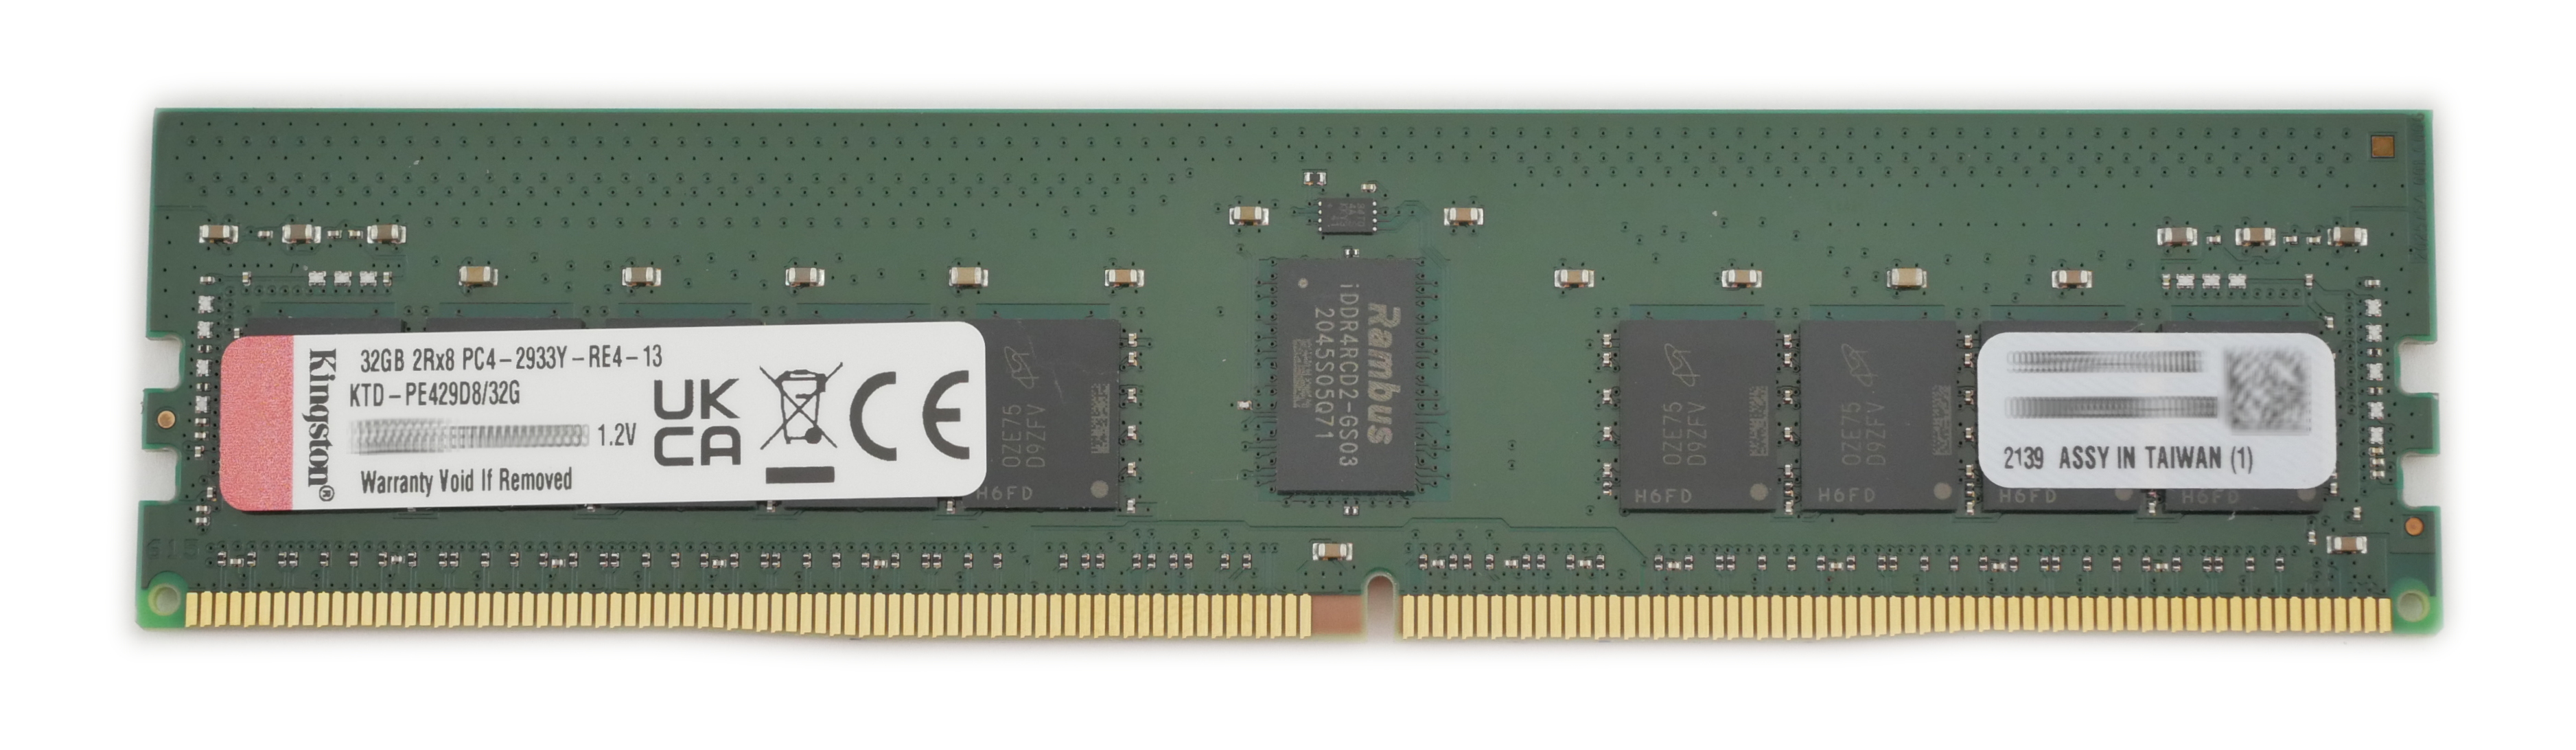 Kingston 32GB KTD-PE429D8/32G PC4-2933Y Dimm 288pin - Click Image to Close